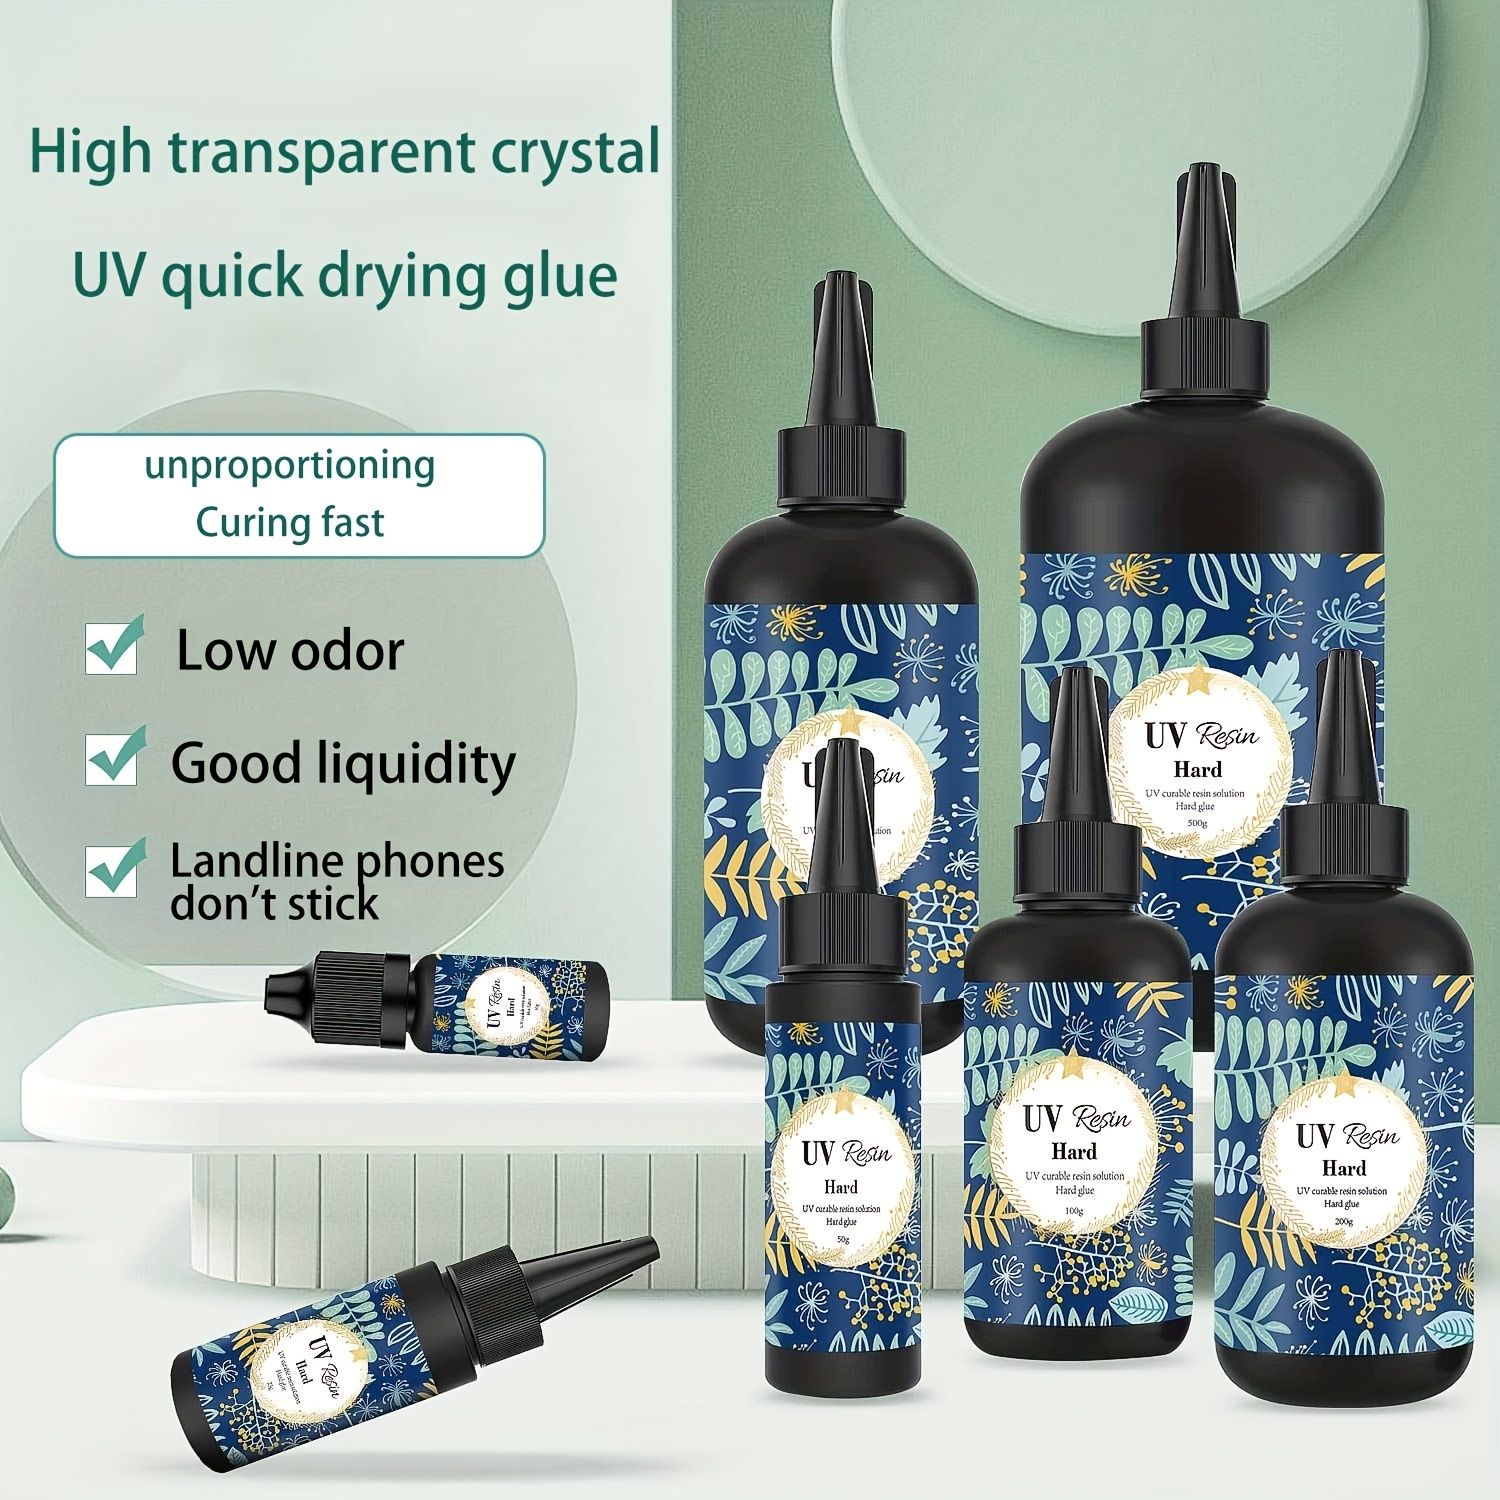 UV Resin Transparent Hard Glue Crystal Clear Ultraviolet Curing DIY Epoxy  Resin Silicone Mold UV Glue Solar Sunlight Jewelry Making Tool 